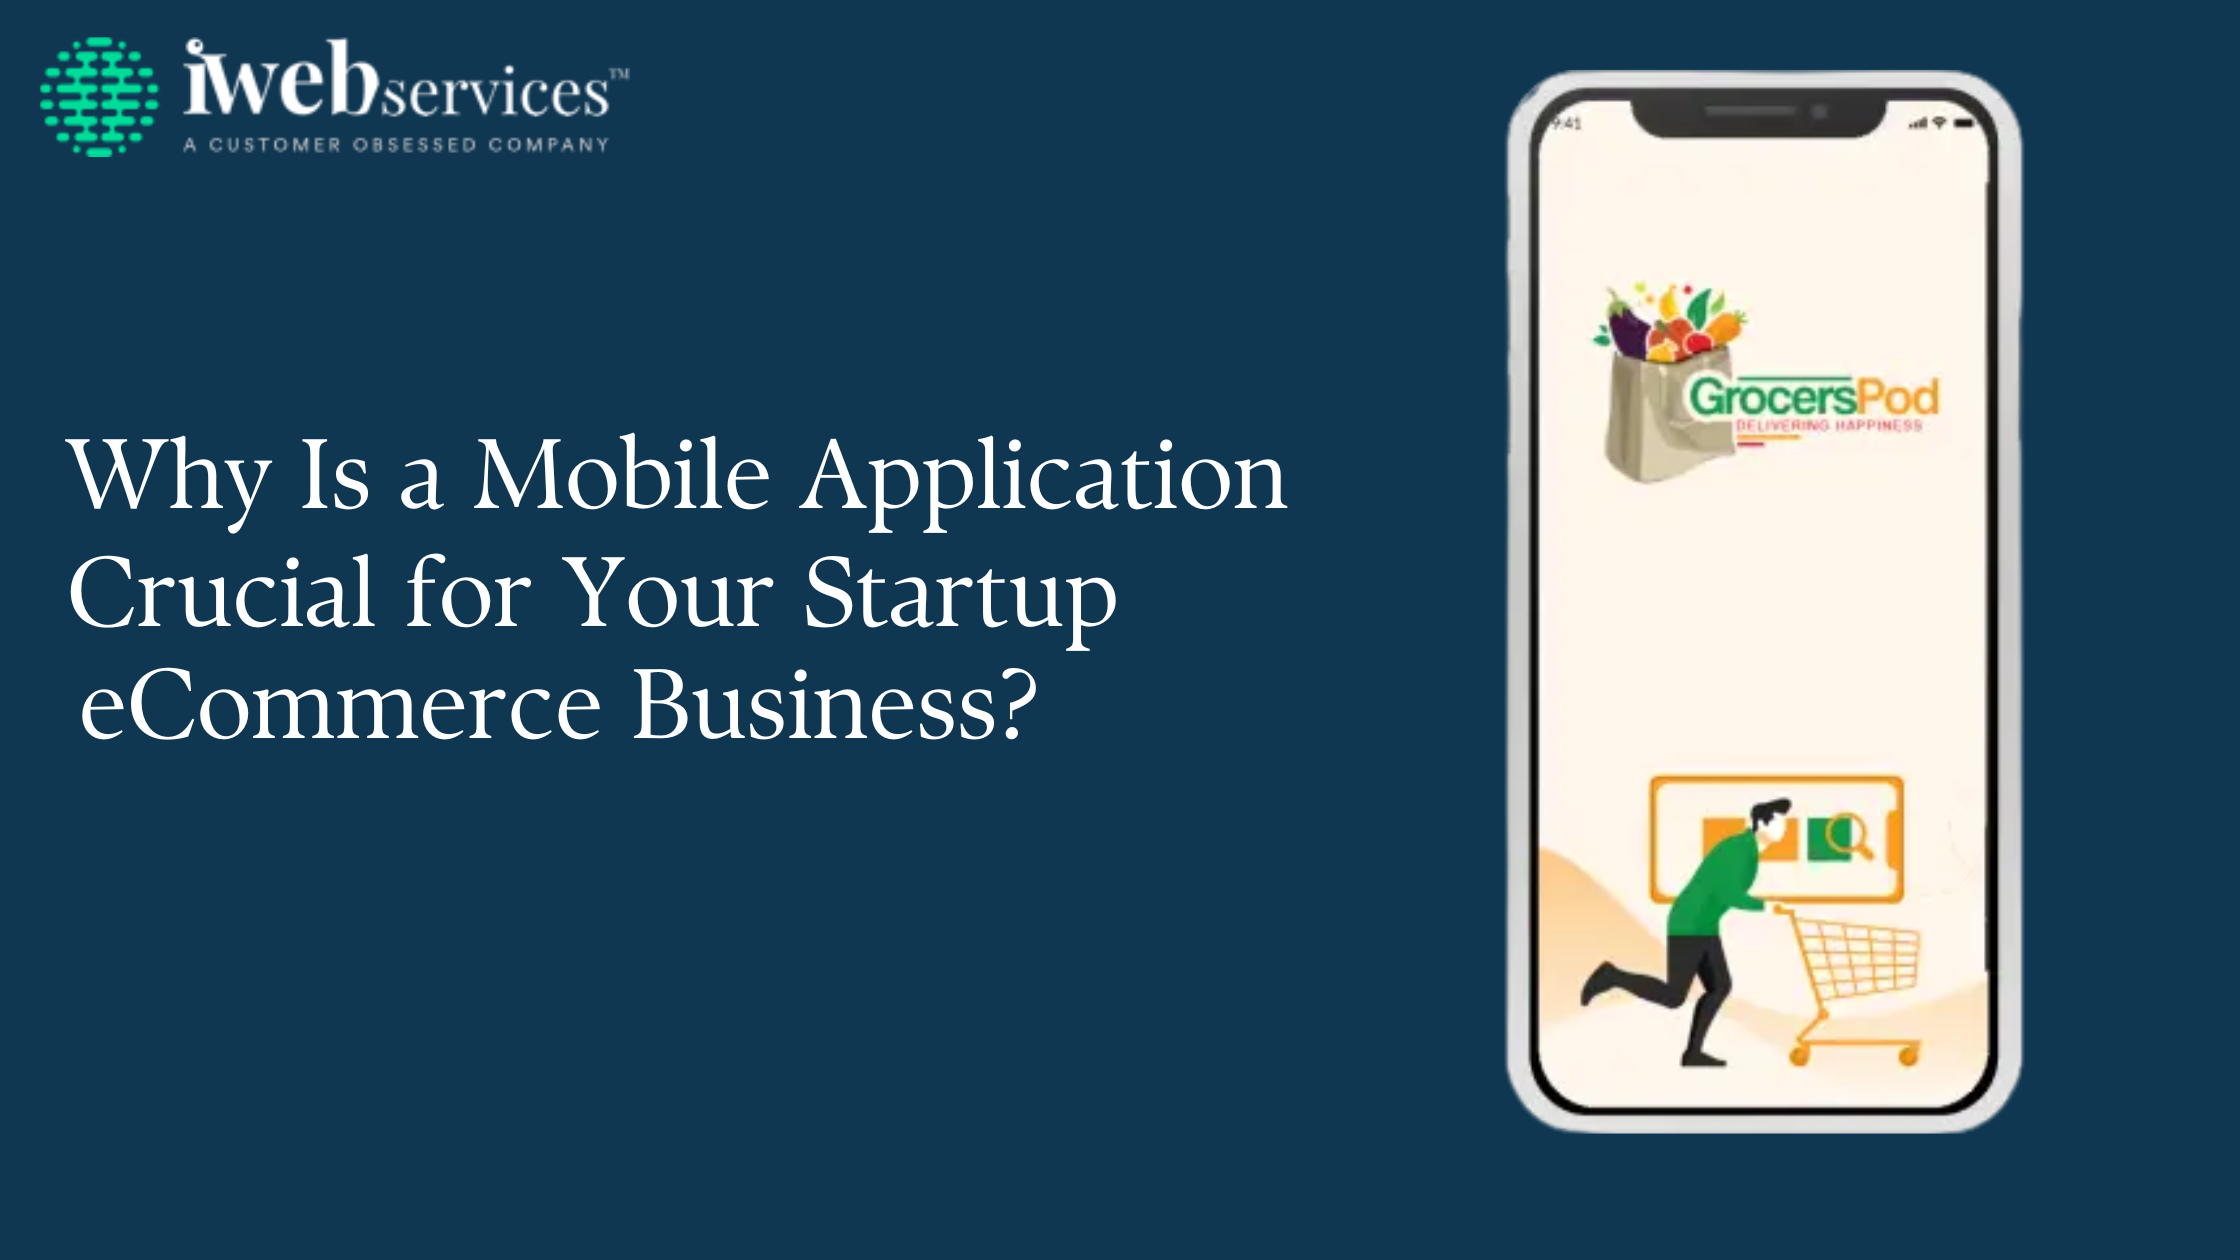 Why Is a Mobile Application Crucial for Your Startup eCommerce Business?